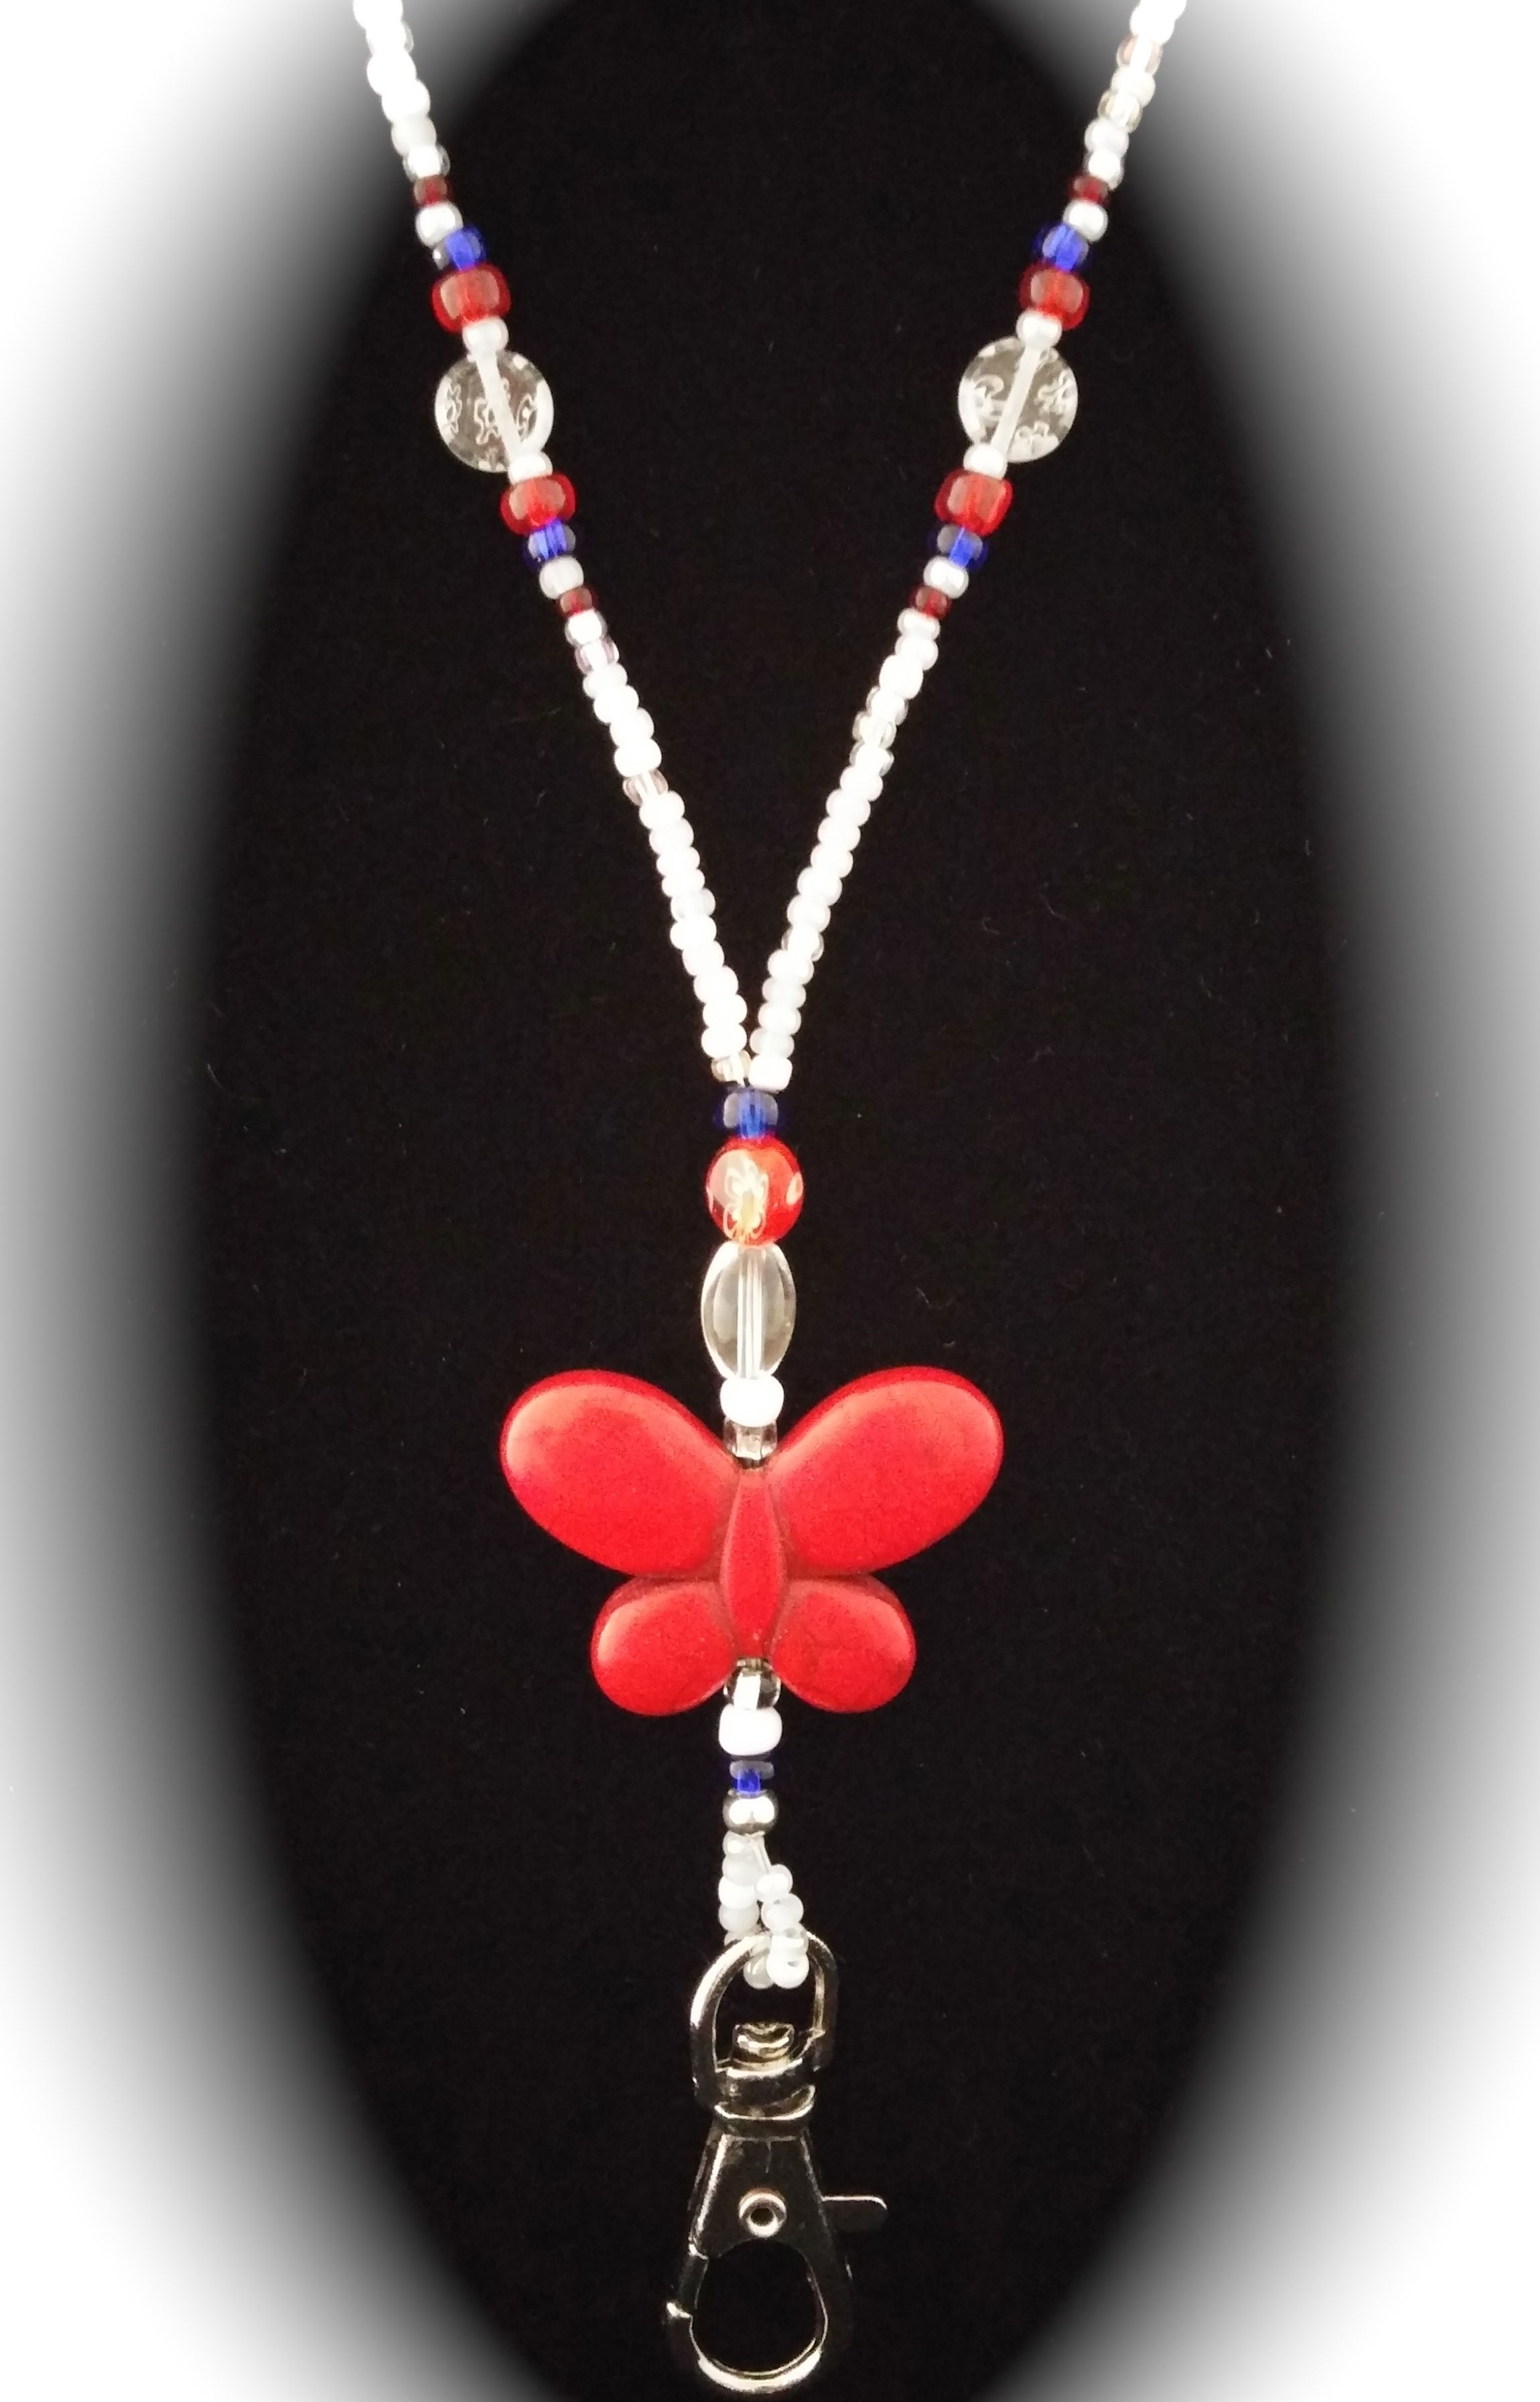 Buy Hand Made Custom Beaded Eyeglass Chain, made to order from Kindred  Souls